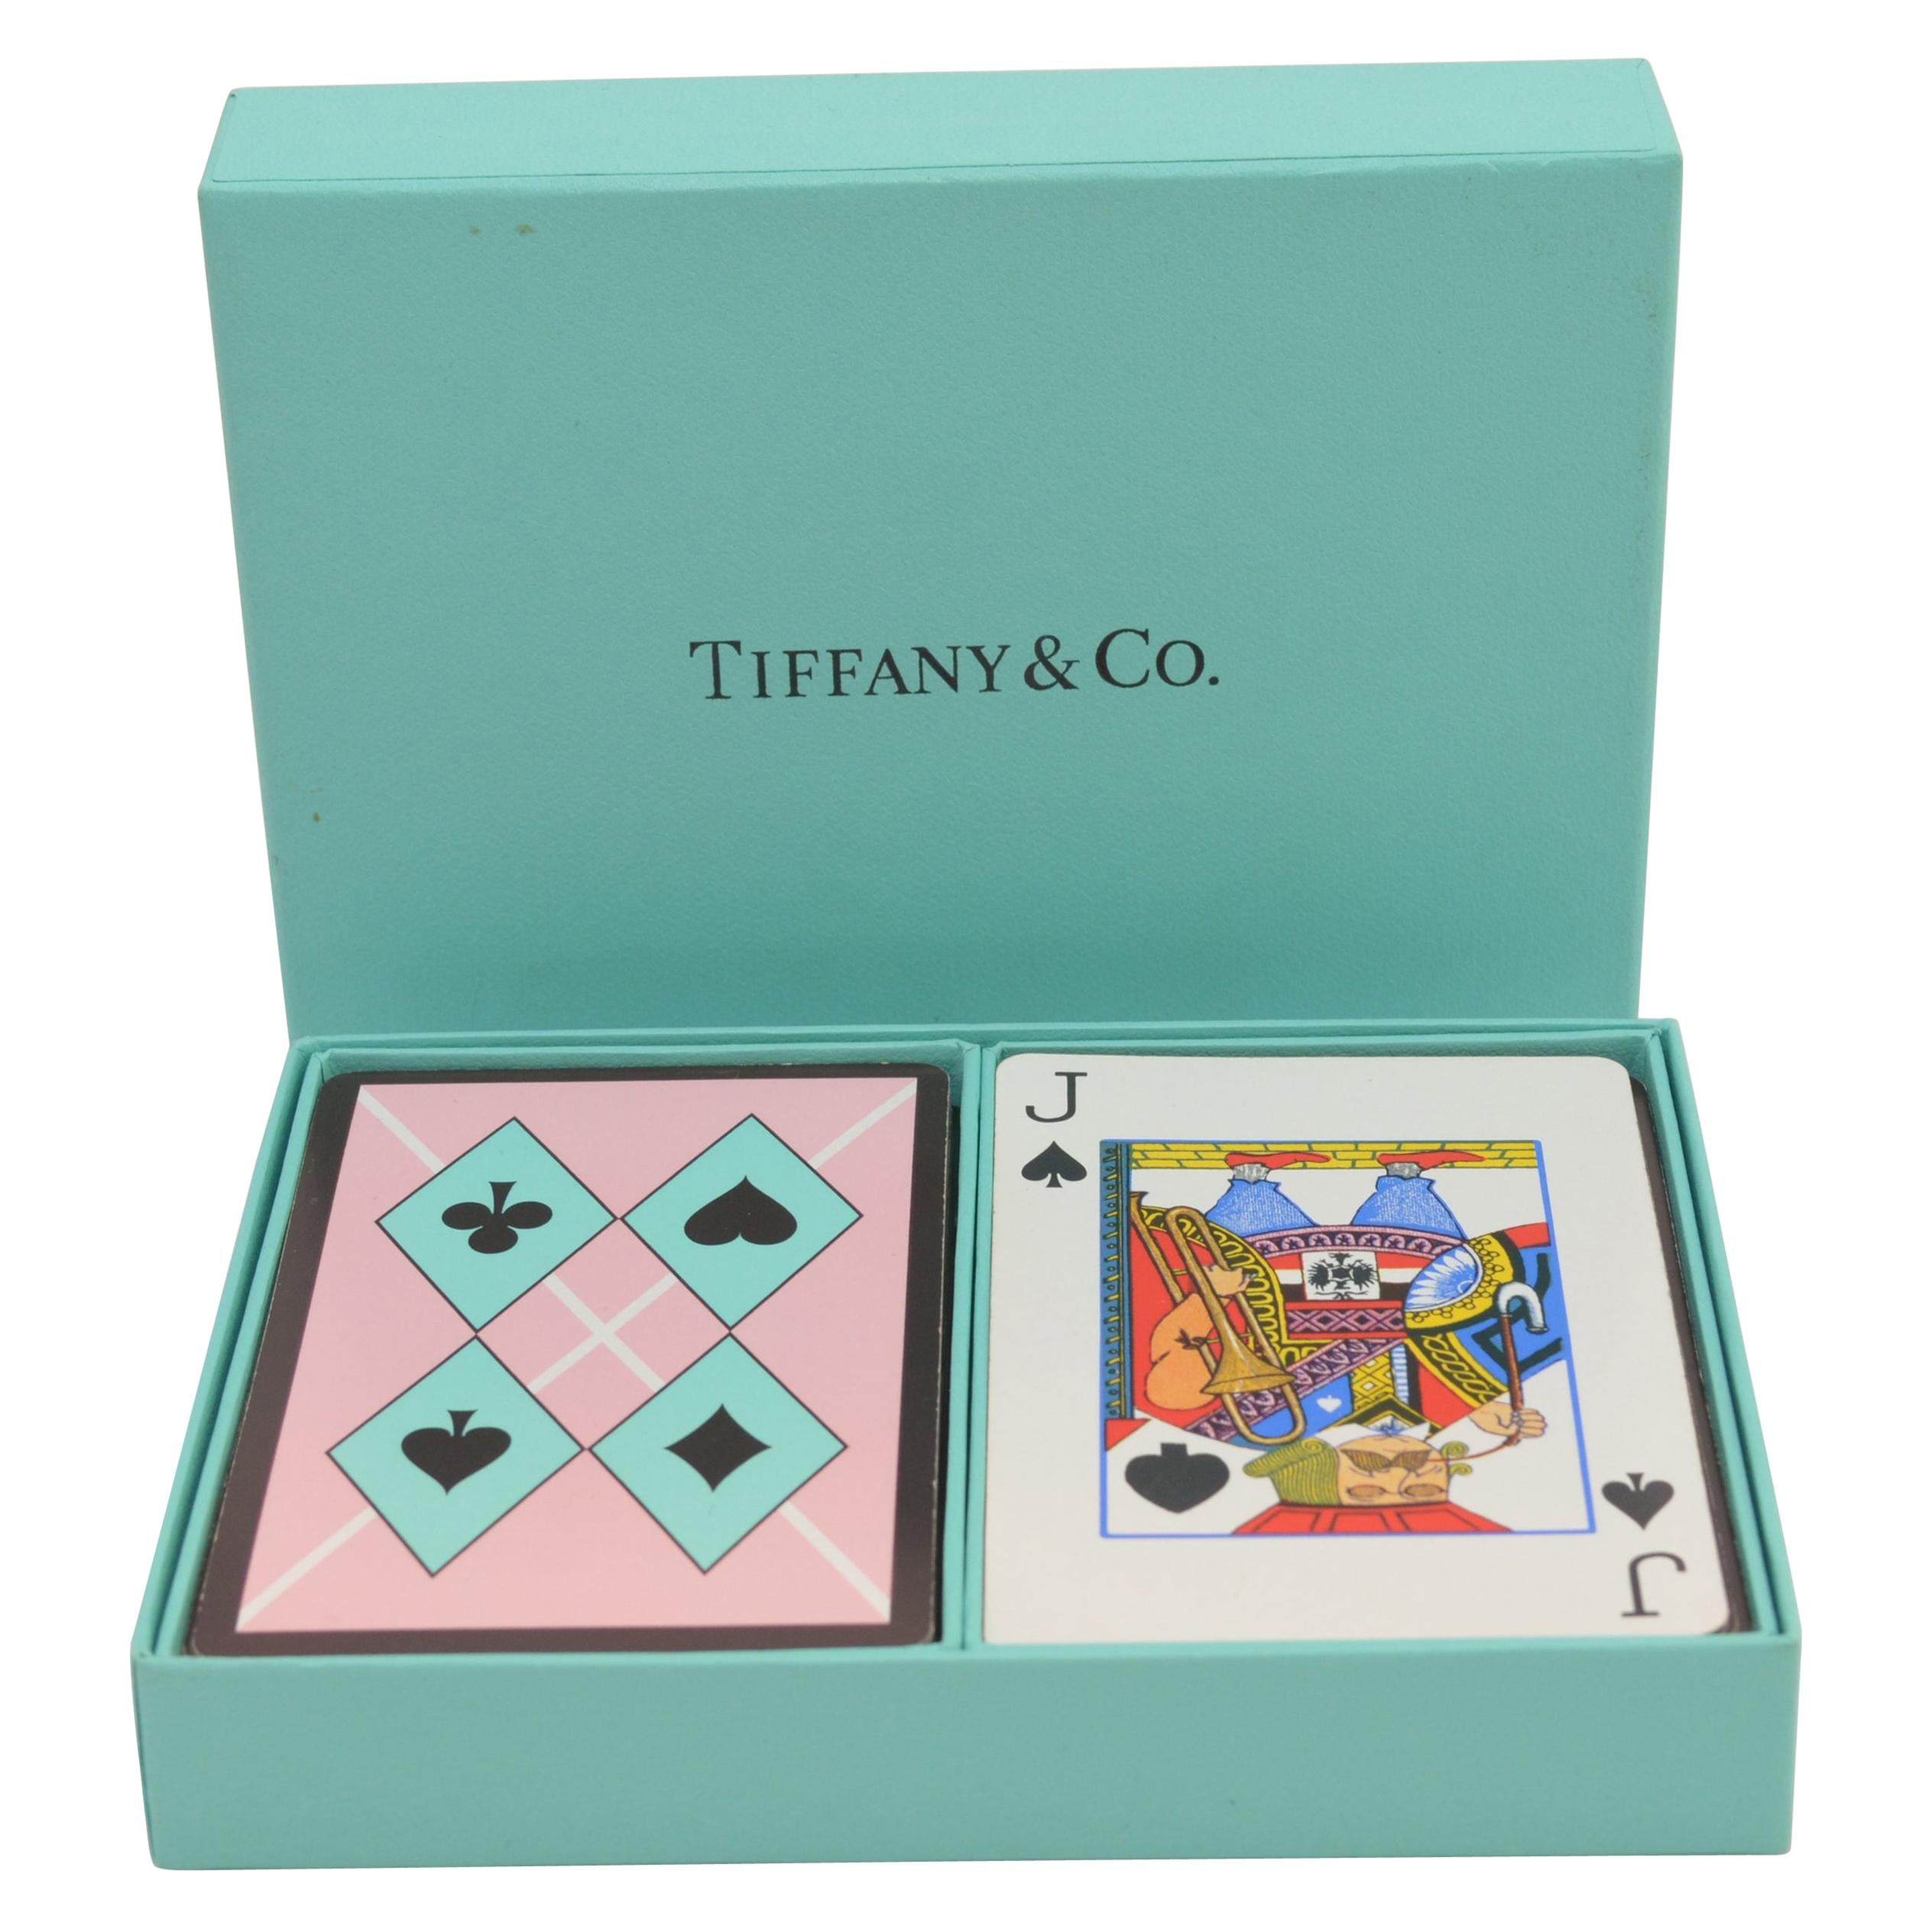 Tiffany & Co. Playing Cards Set with Harlequin Print